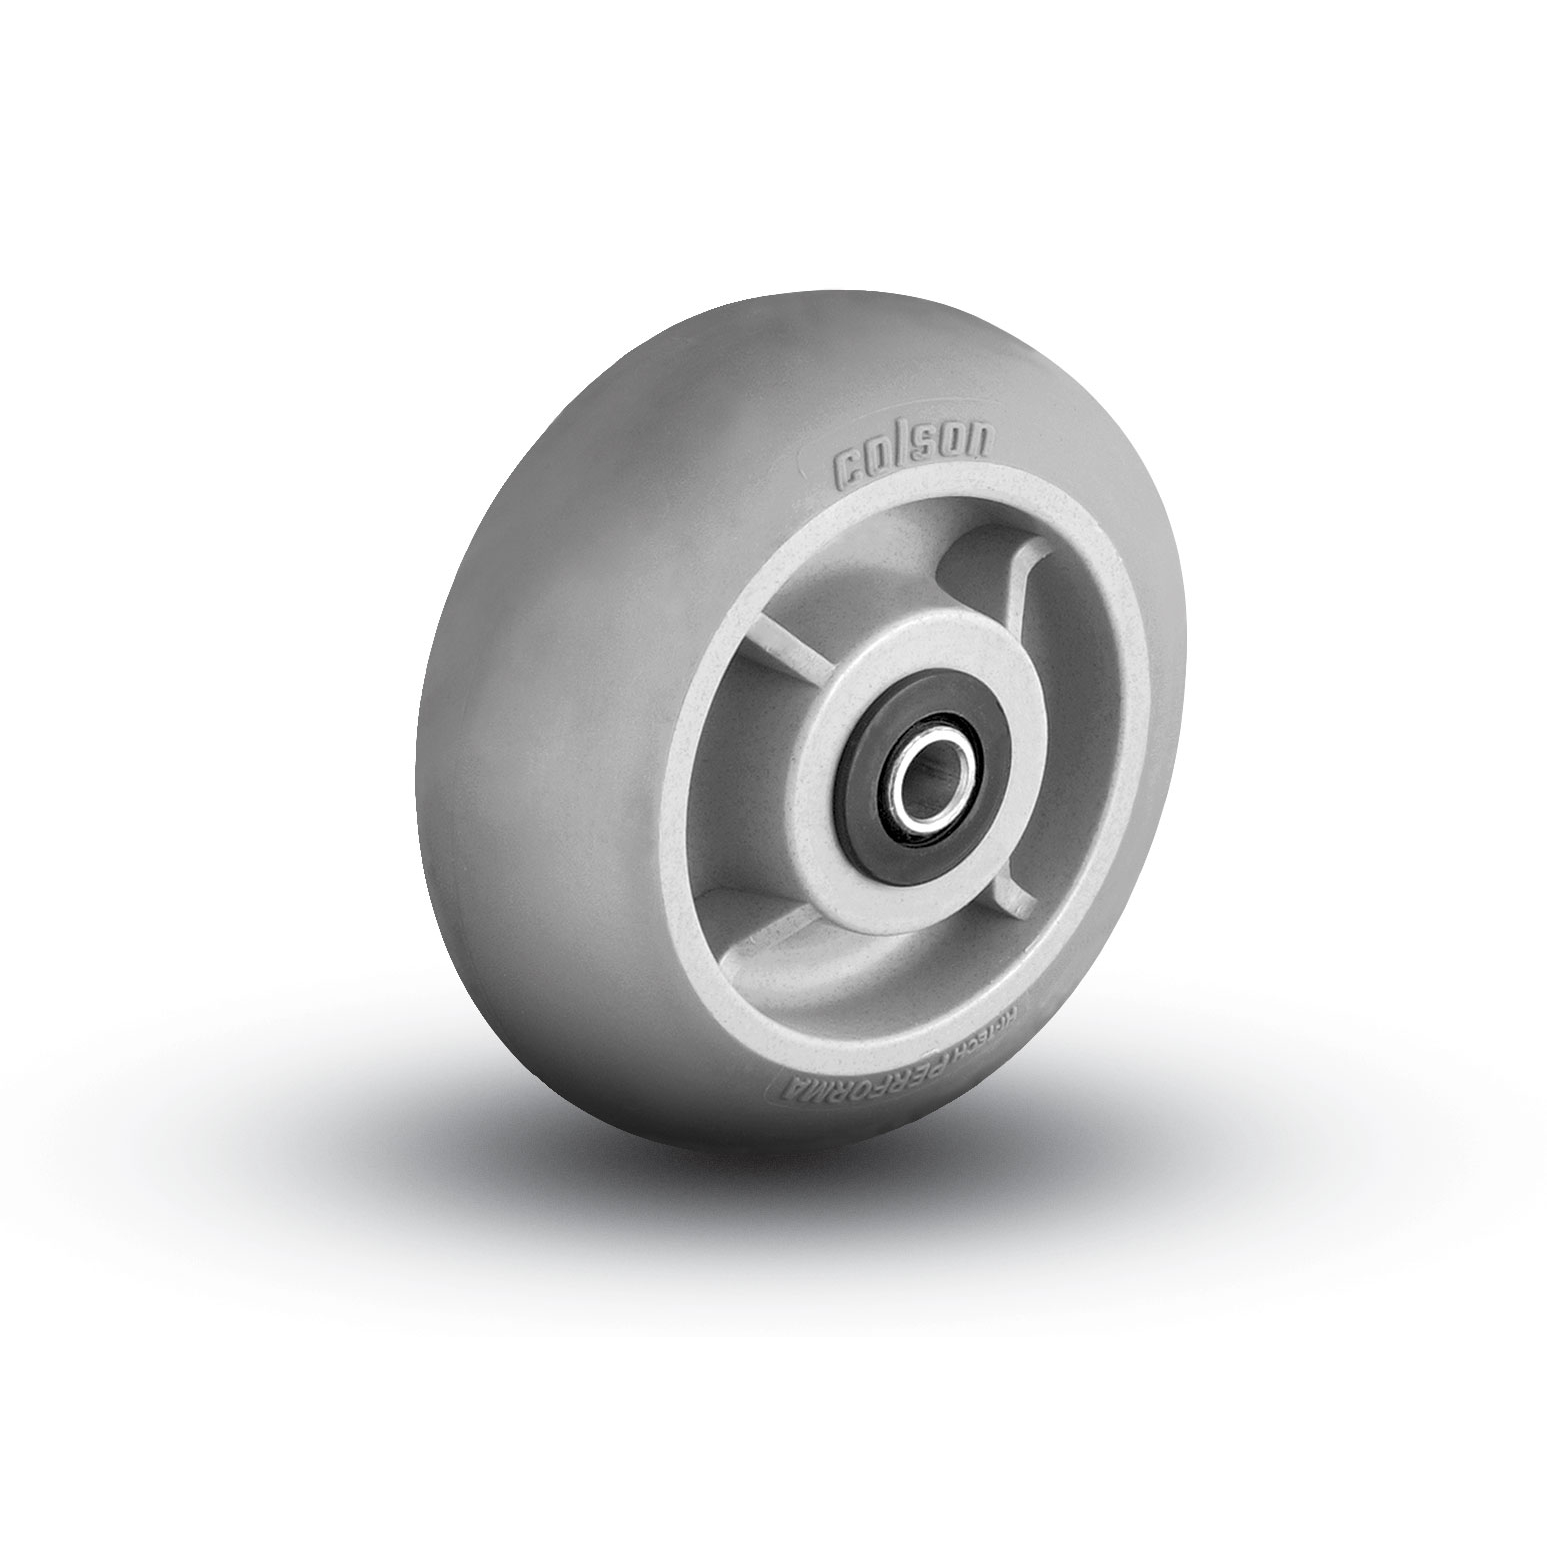 Thermoplastic Rubber on Polyolefin Wheels